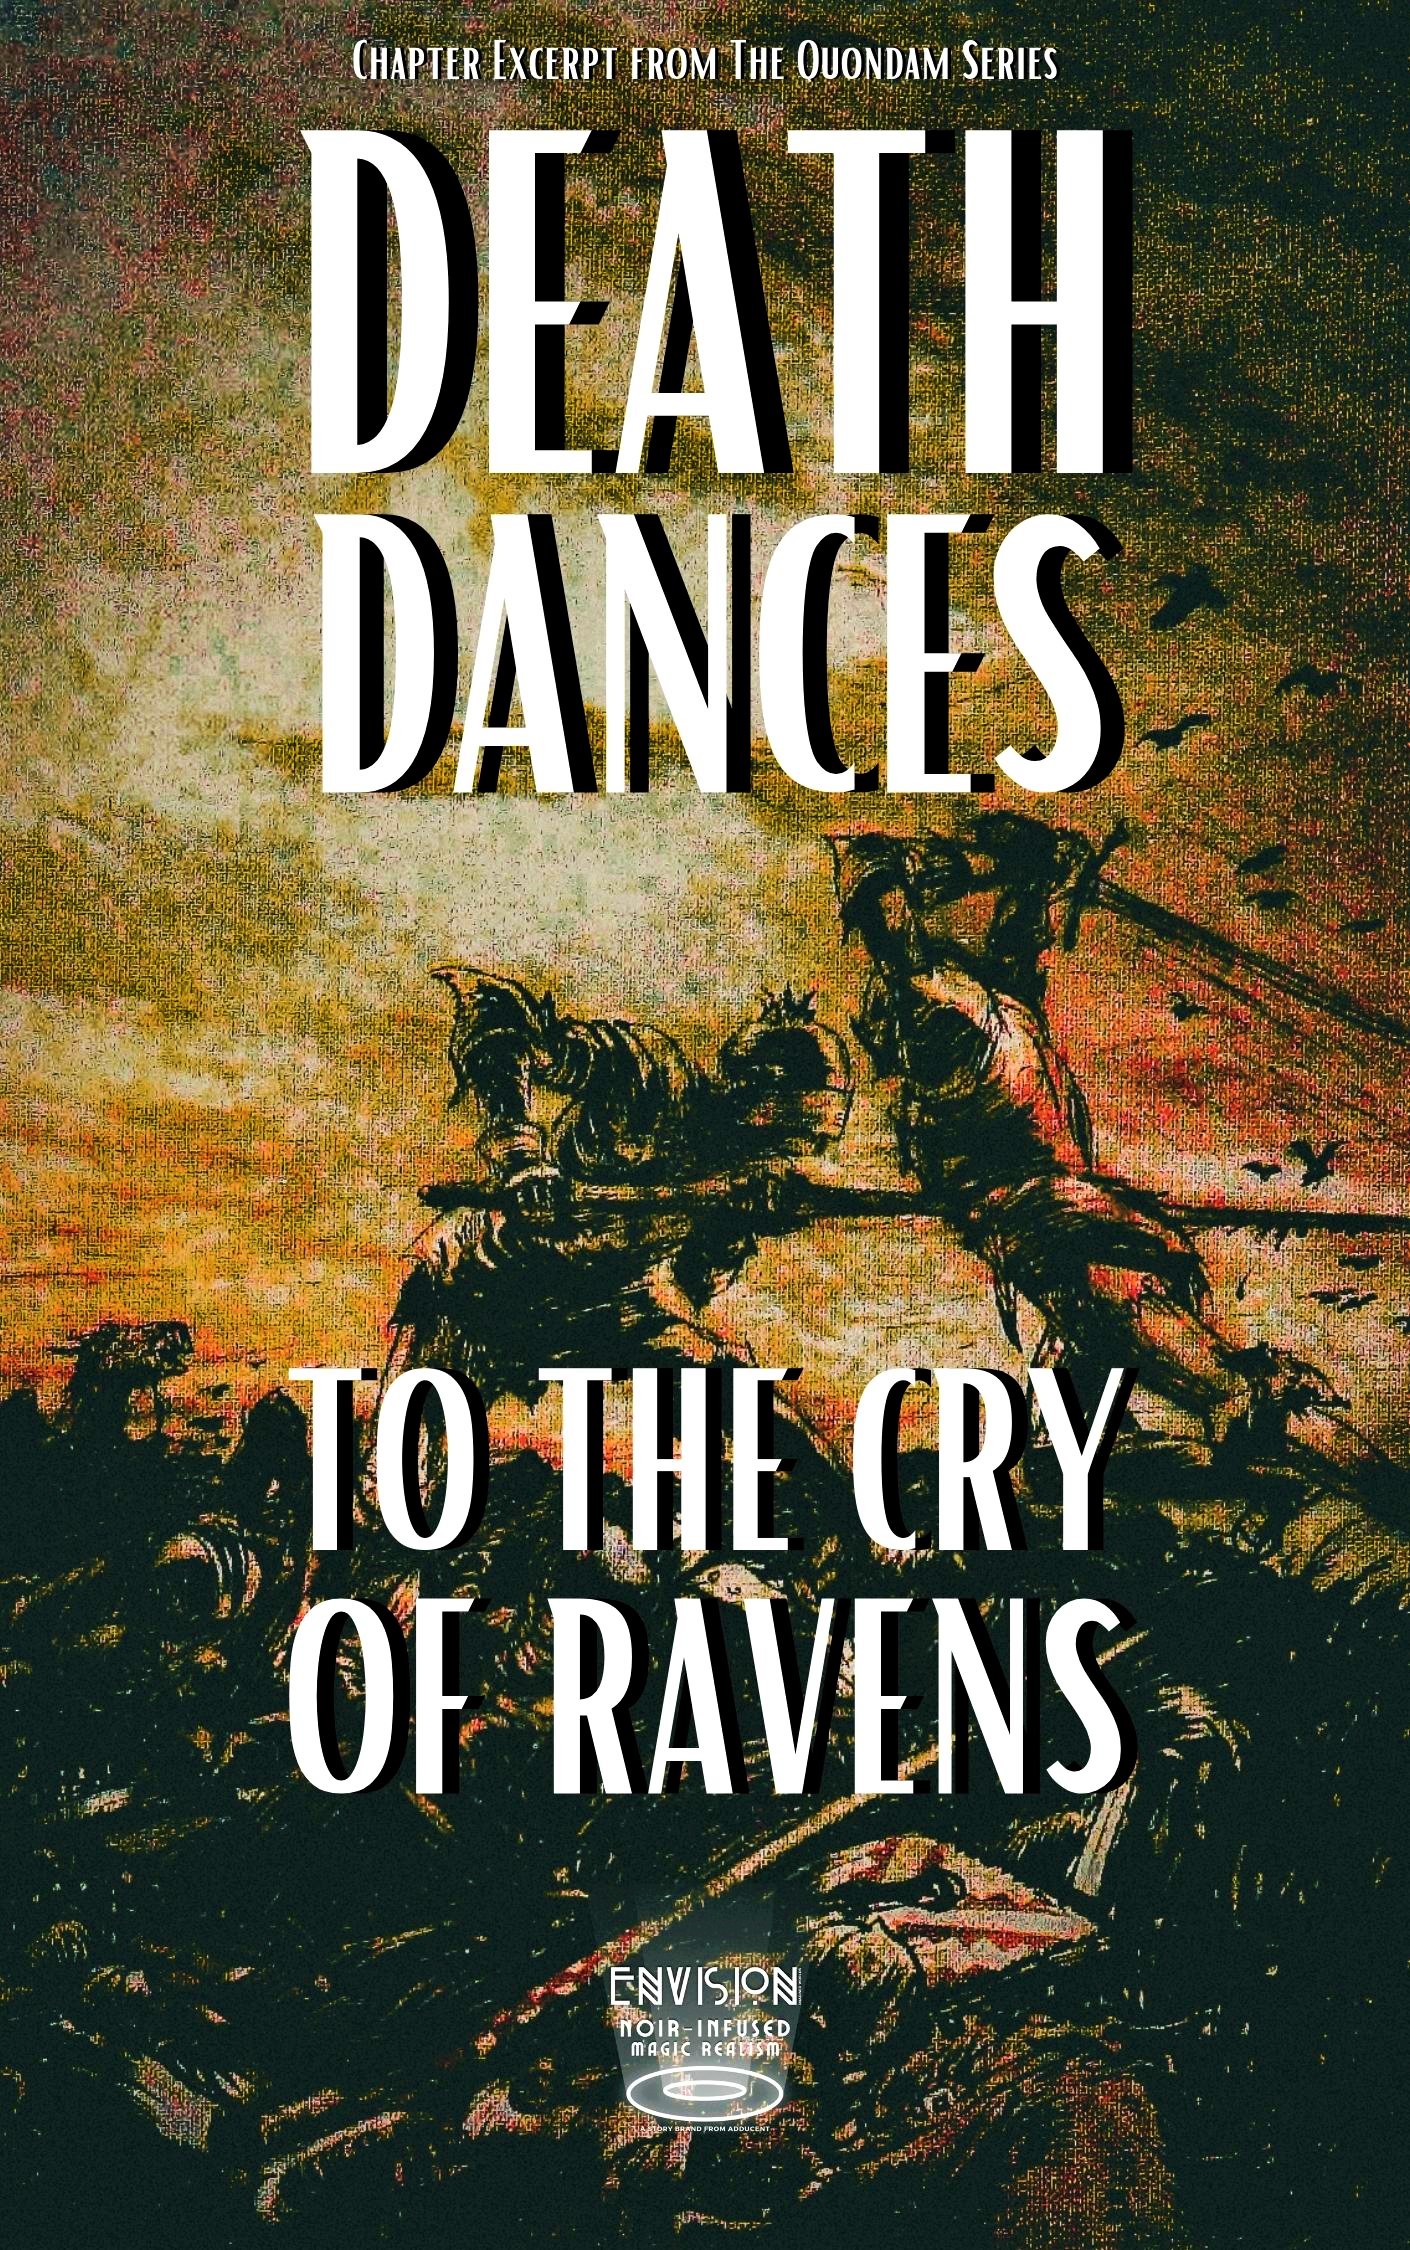 DEATH DANCES to the Cry of Ravens (Chapter Excerpt from Quondam Series) Fiction by Dennis Lowery